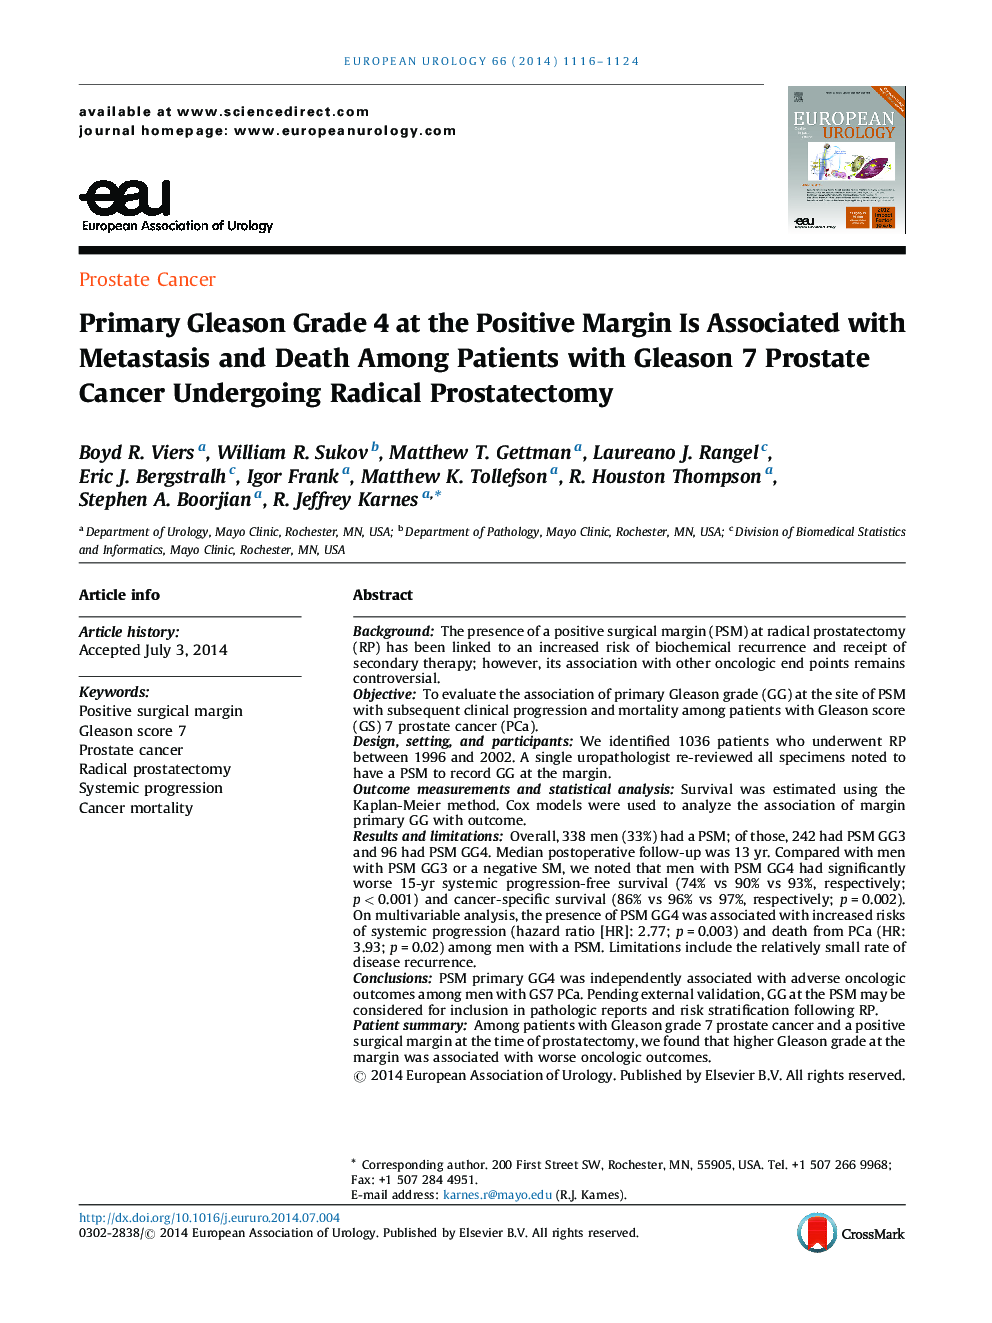 Primary Gleason Grade 4 at the Positive Margin Is Associated with Metastasis and Death Among Patients with Gleason 7 Prostate Cancer Undergoing Radical Prostatectomy